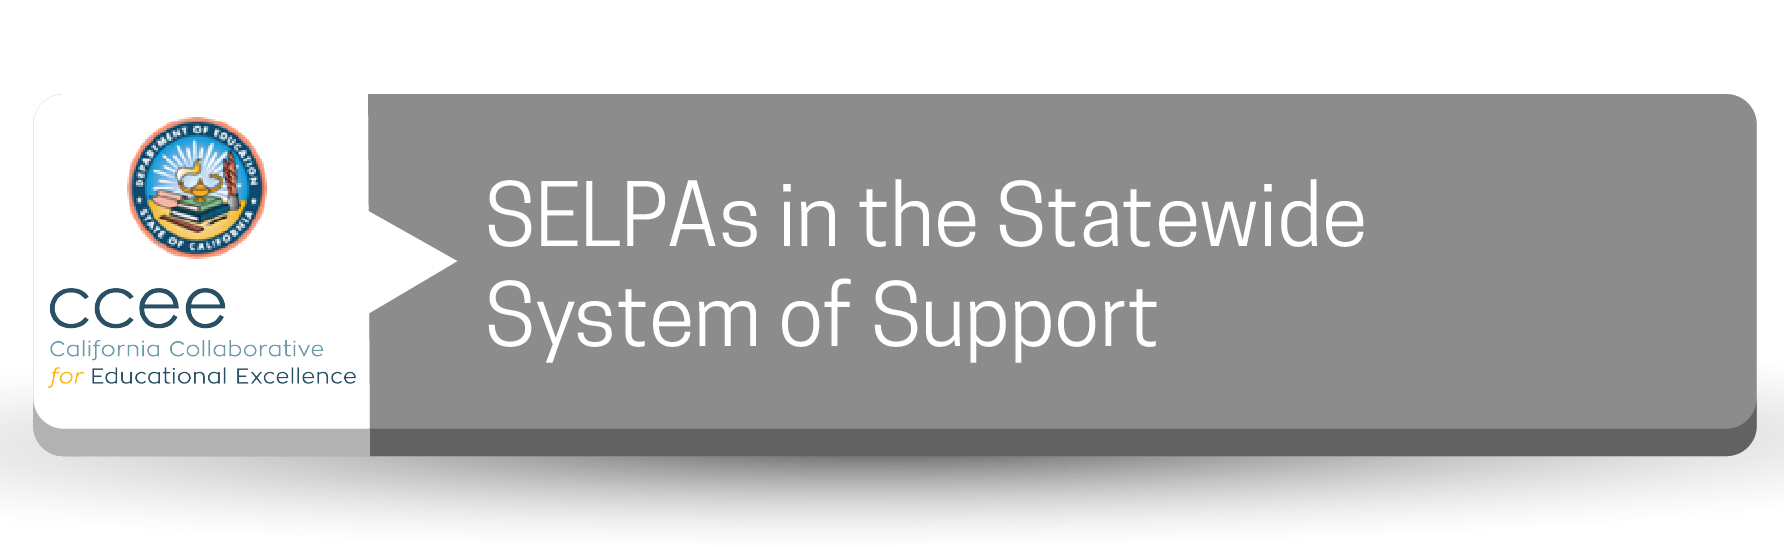 SELPAs in the Statewide System of Support Button